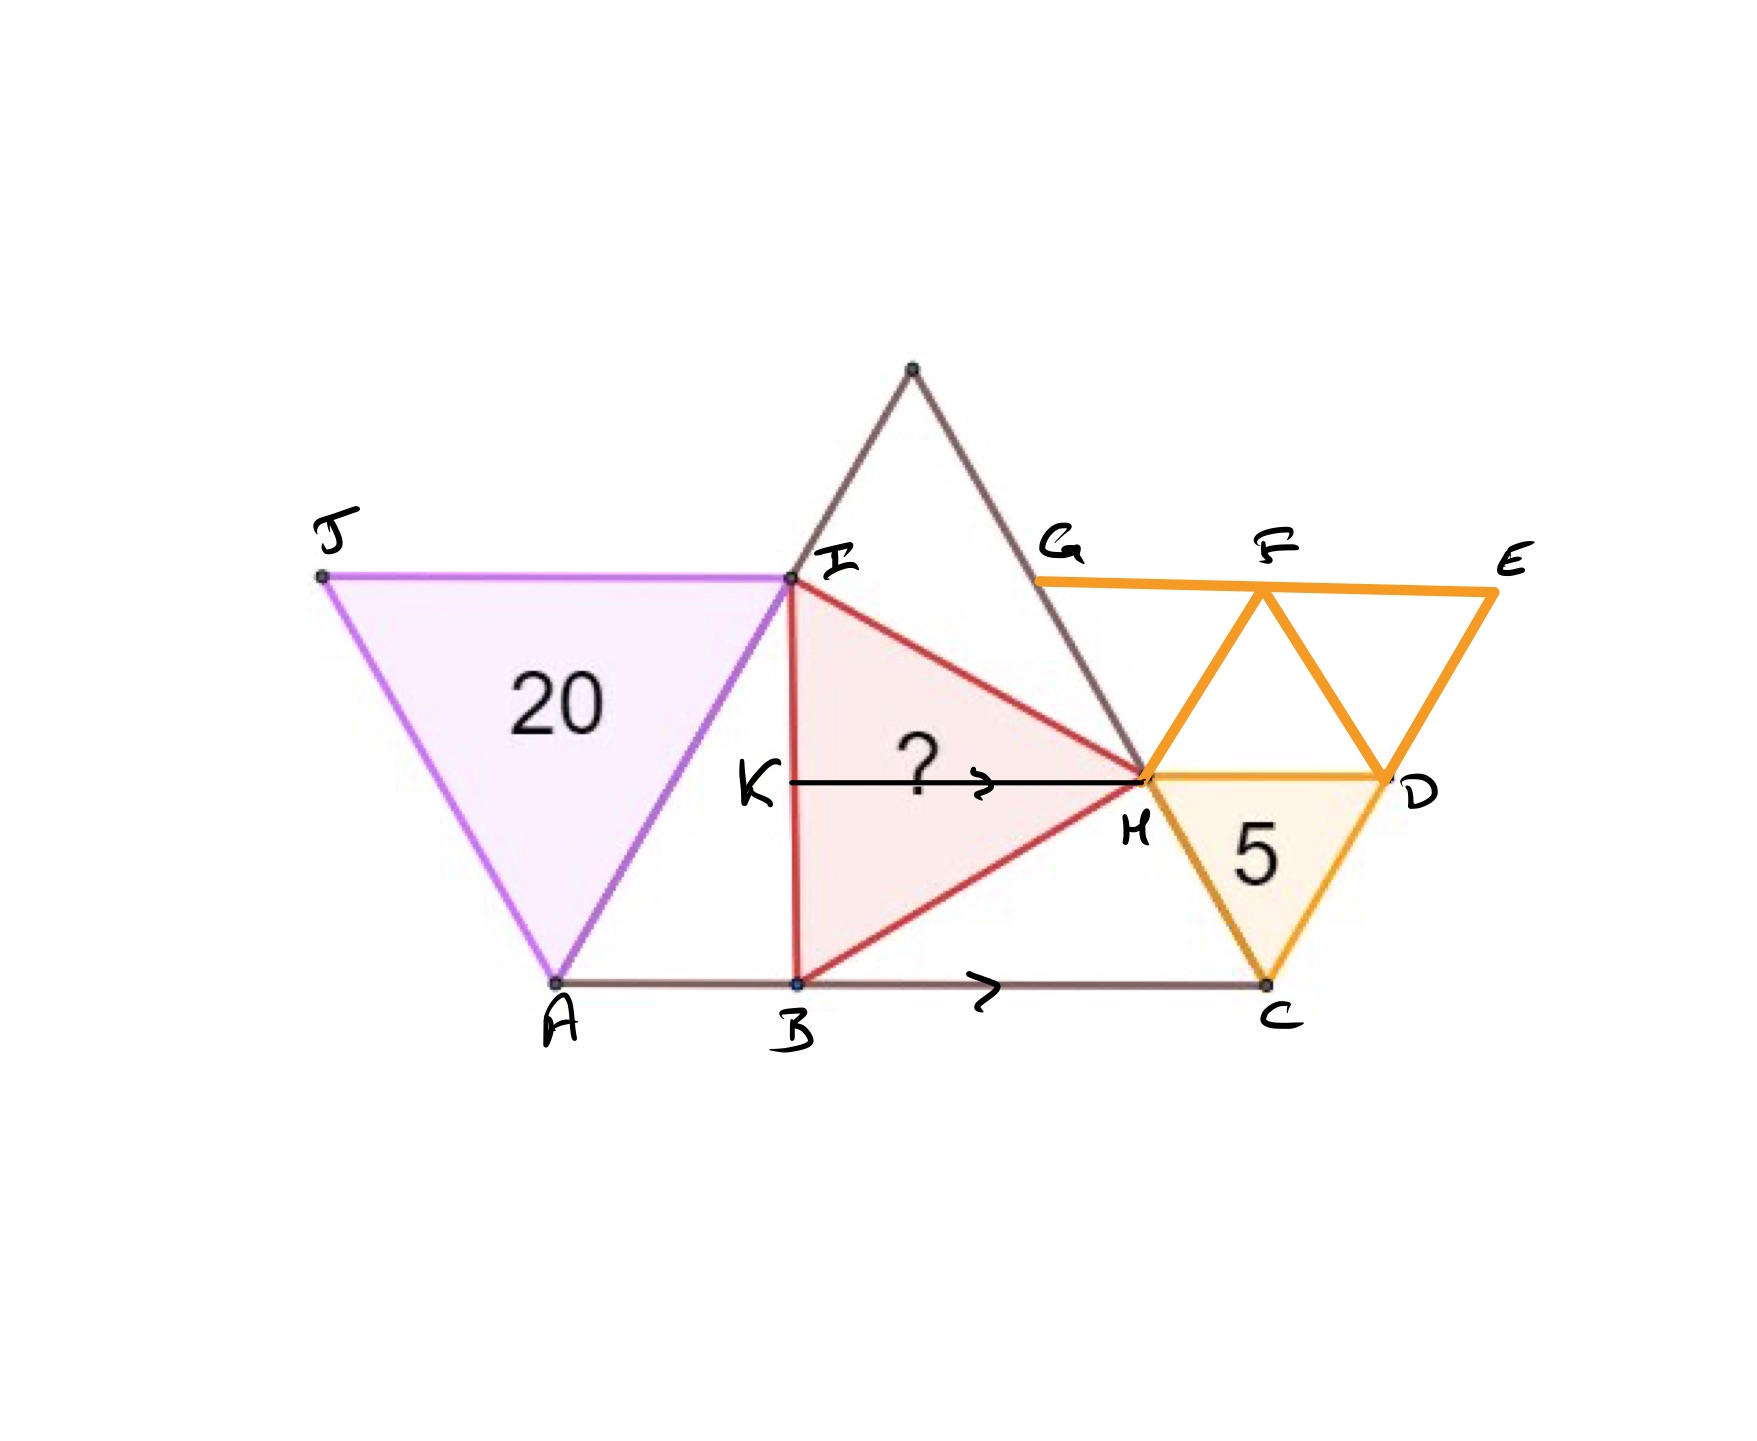 Four equilateral triangles labelled